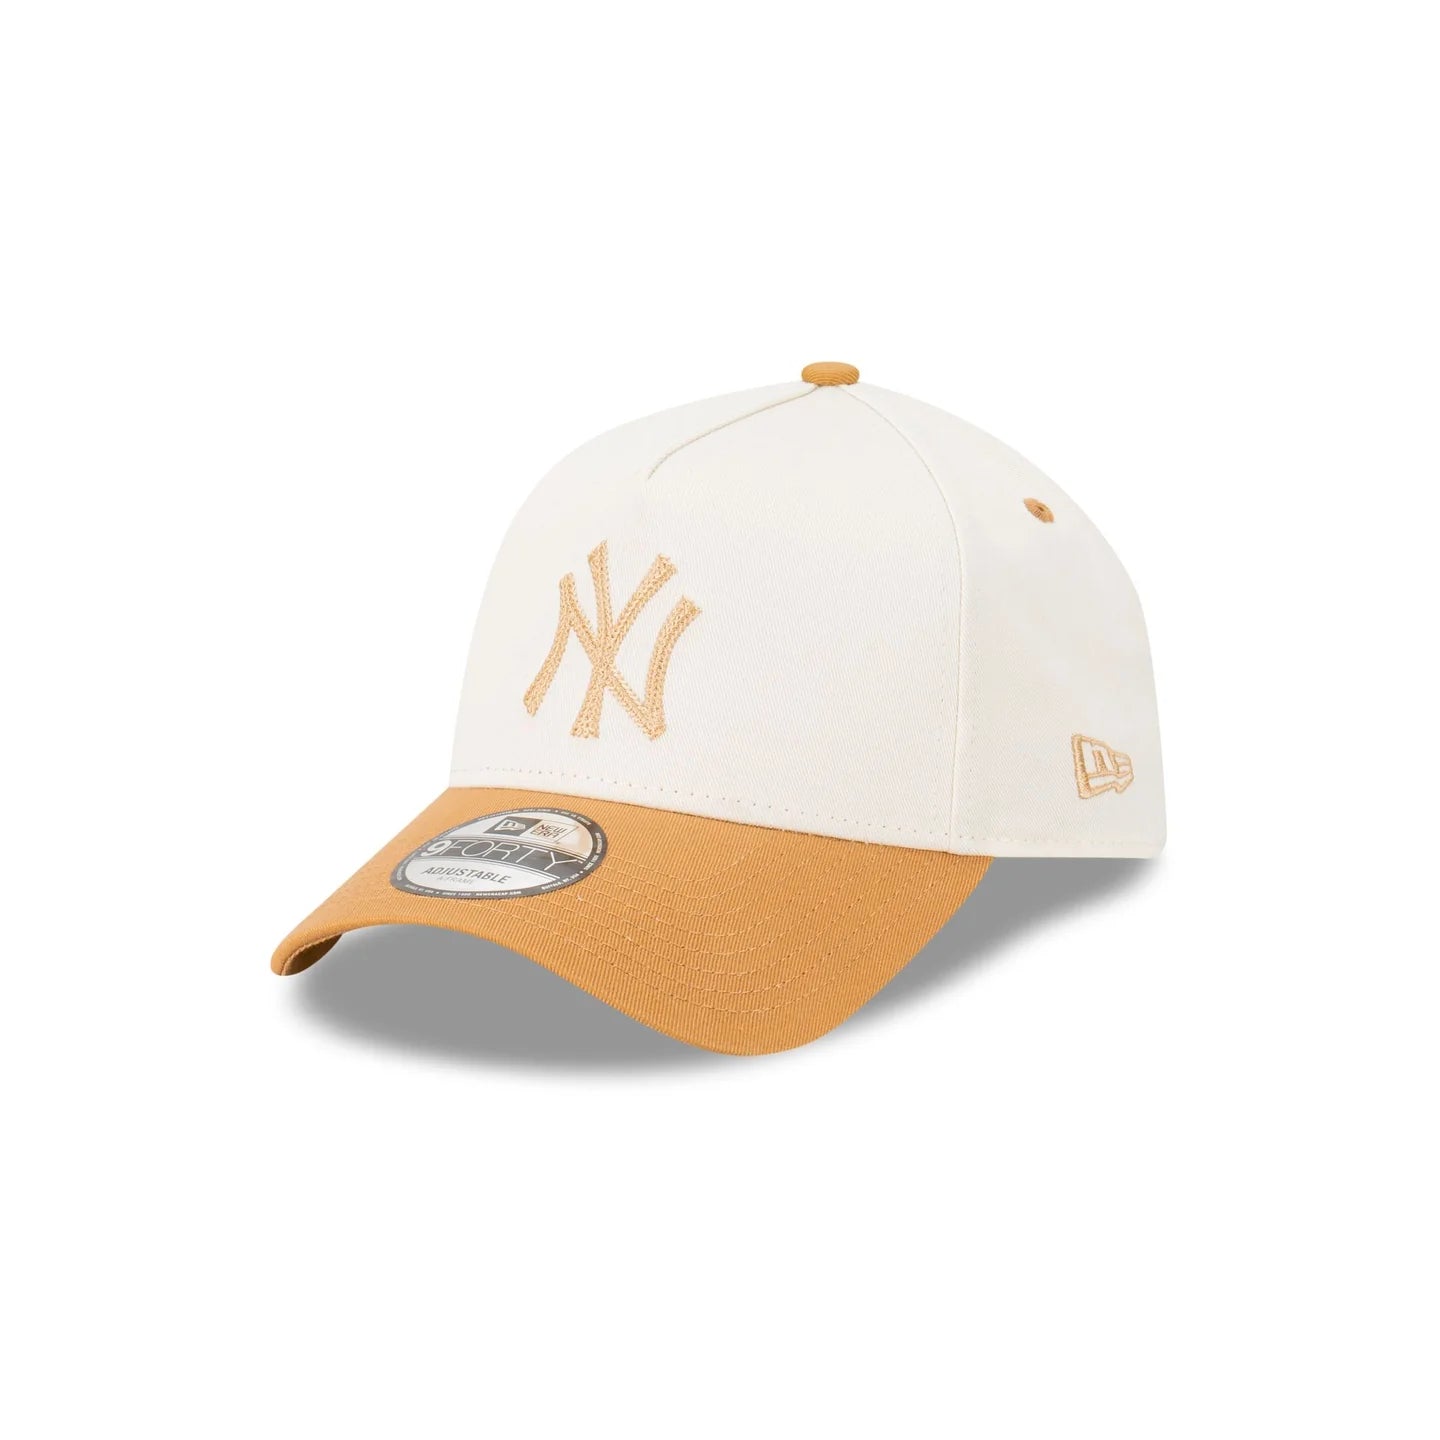 New York Yankees Hat - Winecork Chainstitch 2-Tone White and Wheat Brown 9Forty A-Frame MLB Strapback Cap - New Era